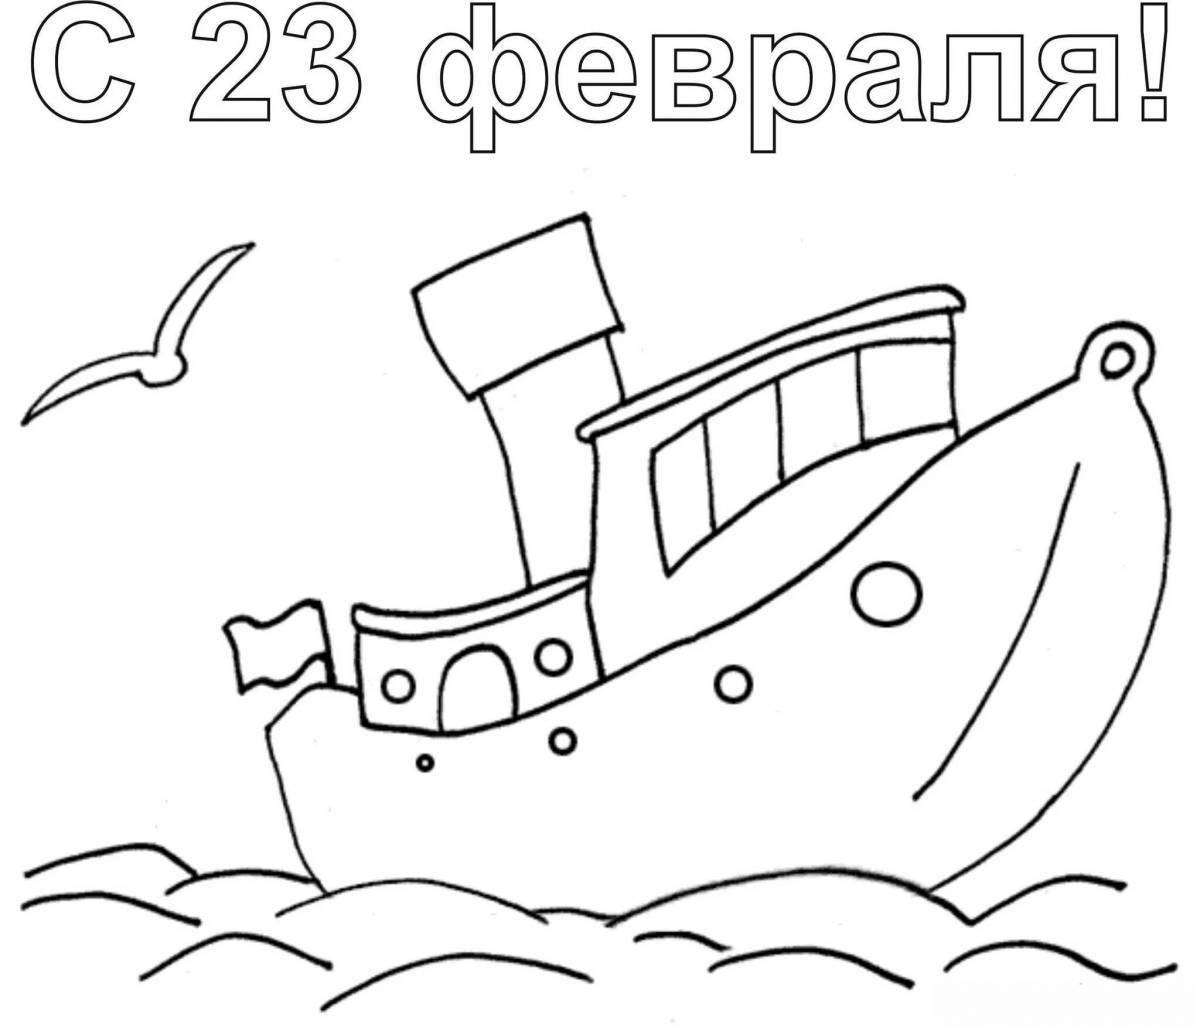 Crazy coloring book for 4 year olds, February 23